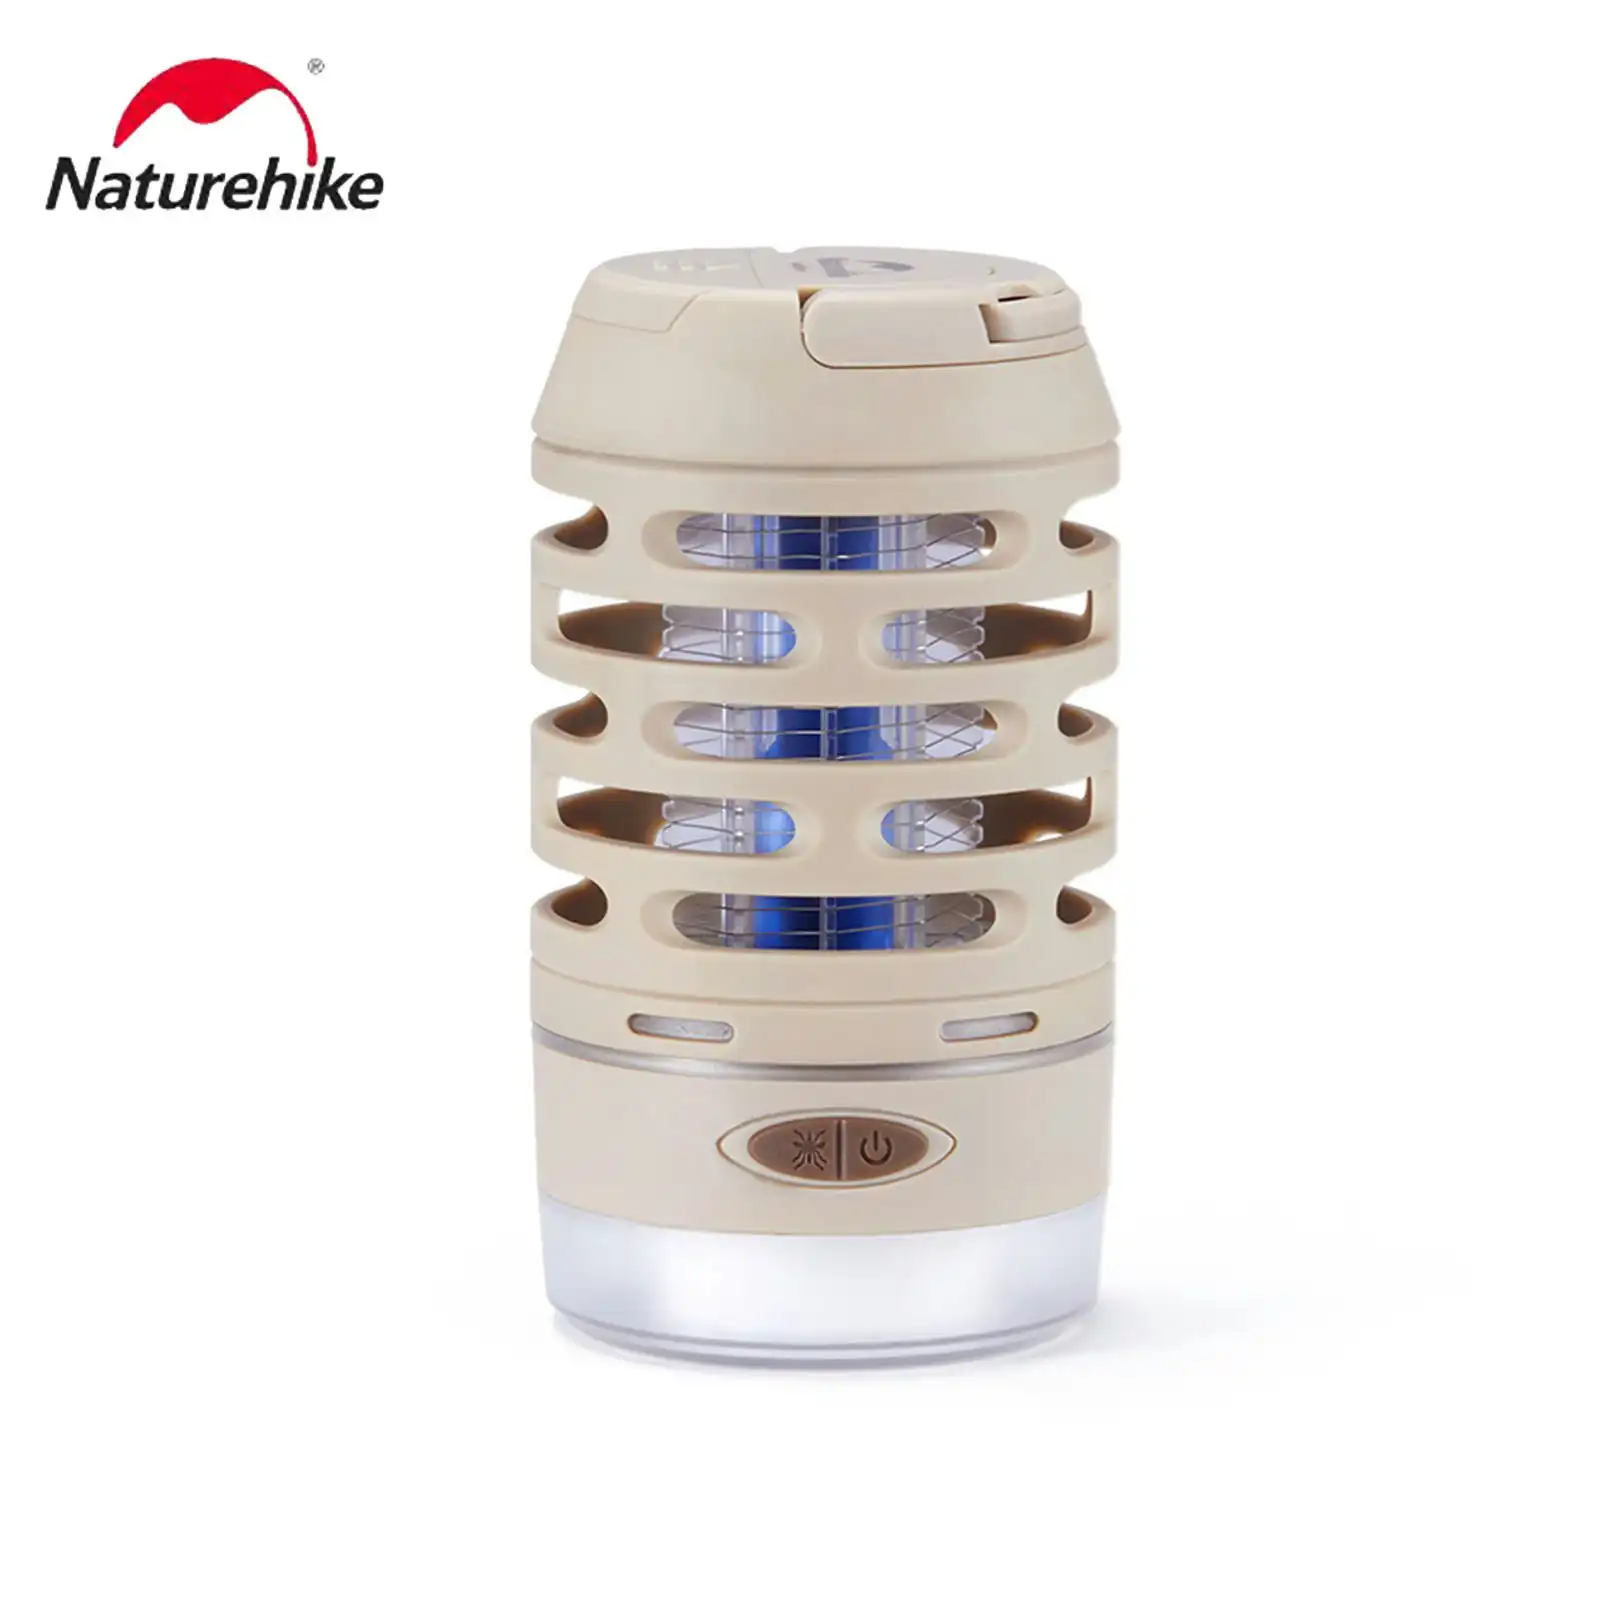 NatureHike Outdoor Electric Shock Mosquito Lamp Insect Repellent Light Waterproof Camping Lights Outdoor - Khaki